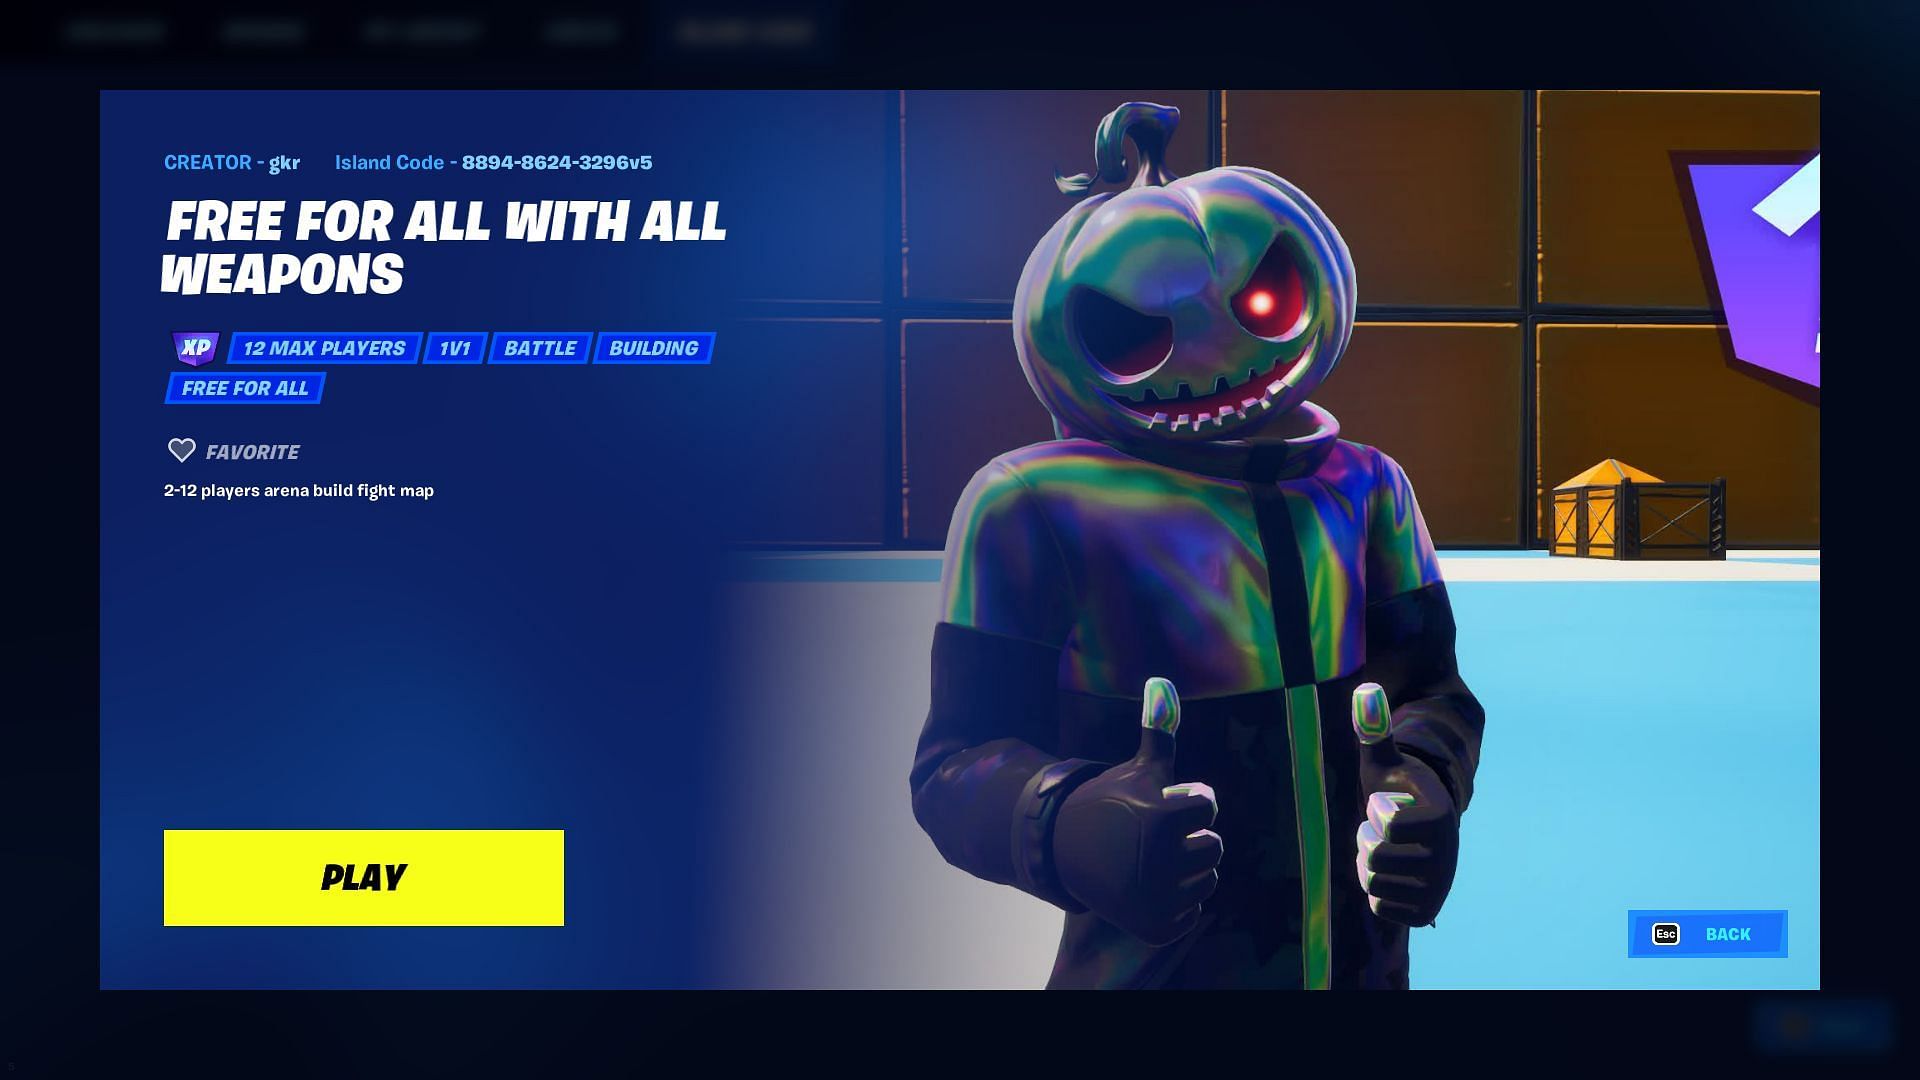 Copy-paste the code to make things easy (Image via Epic Games/Fortnite)